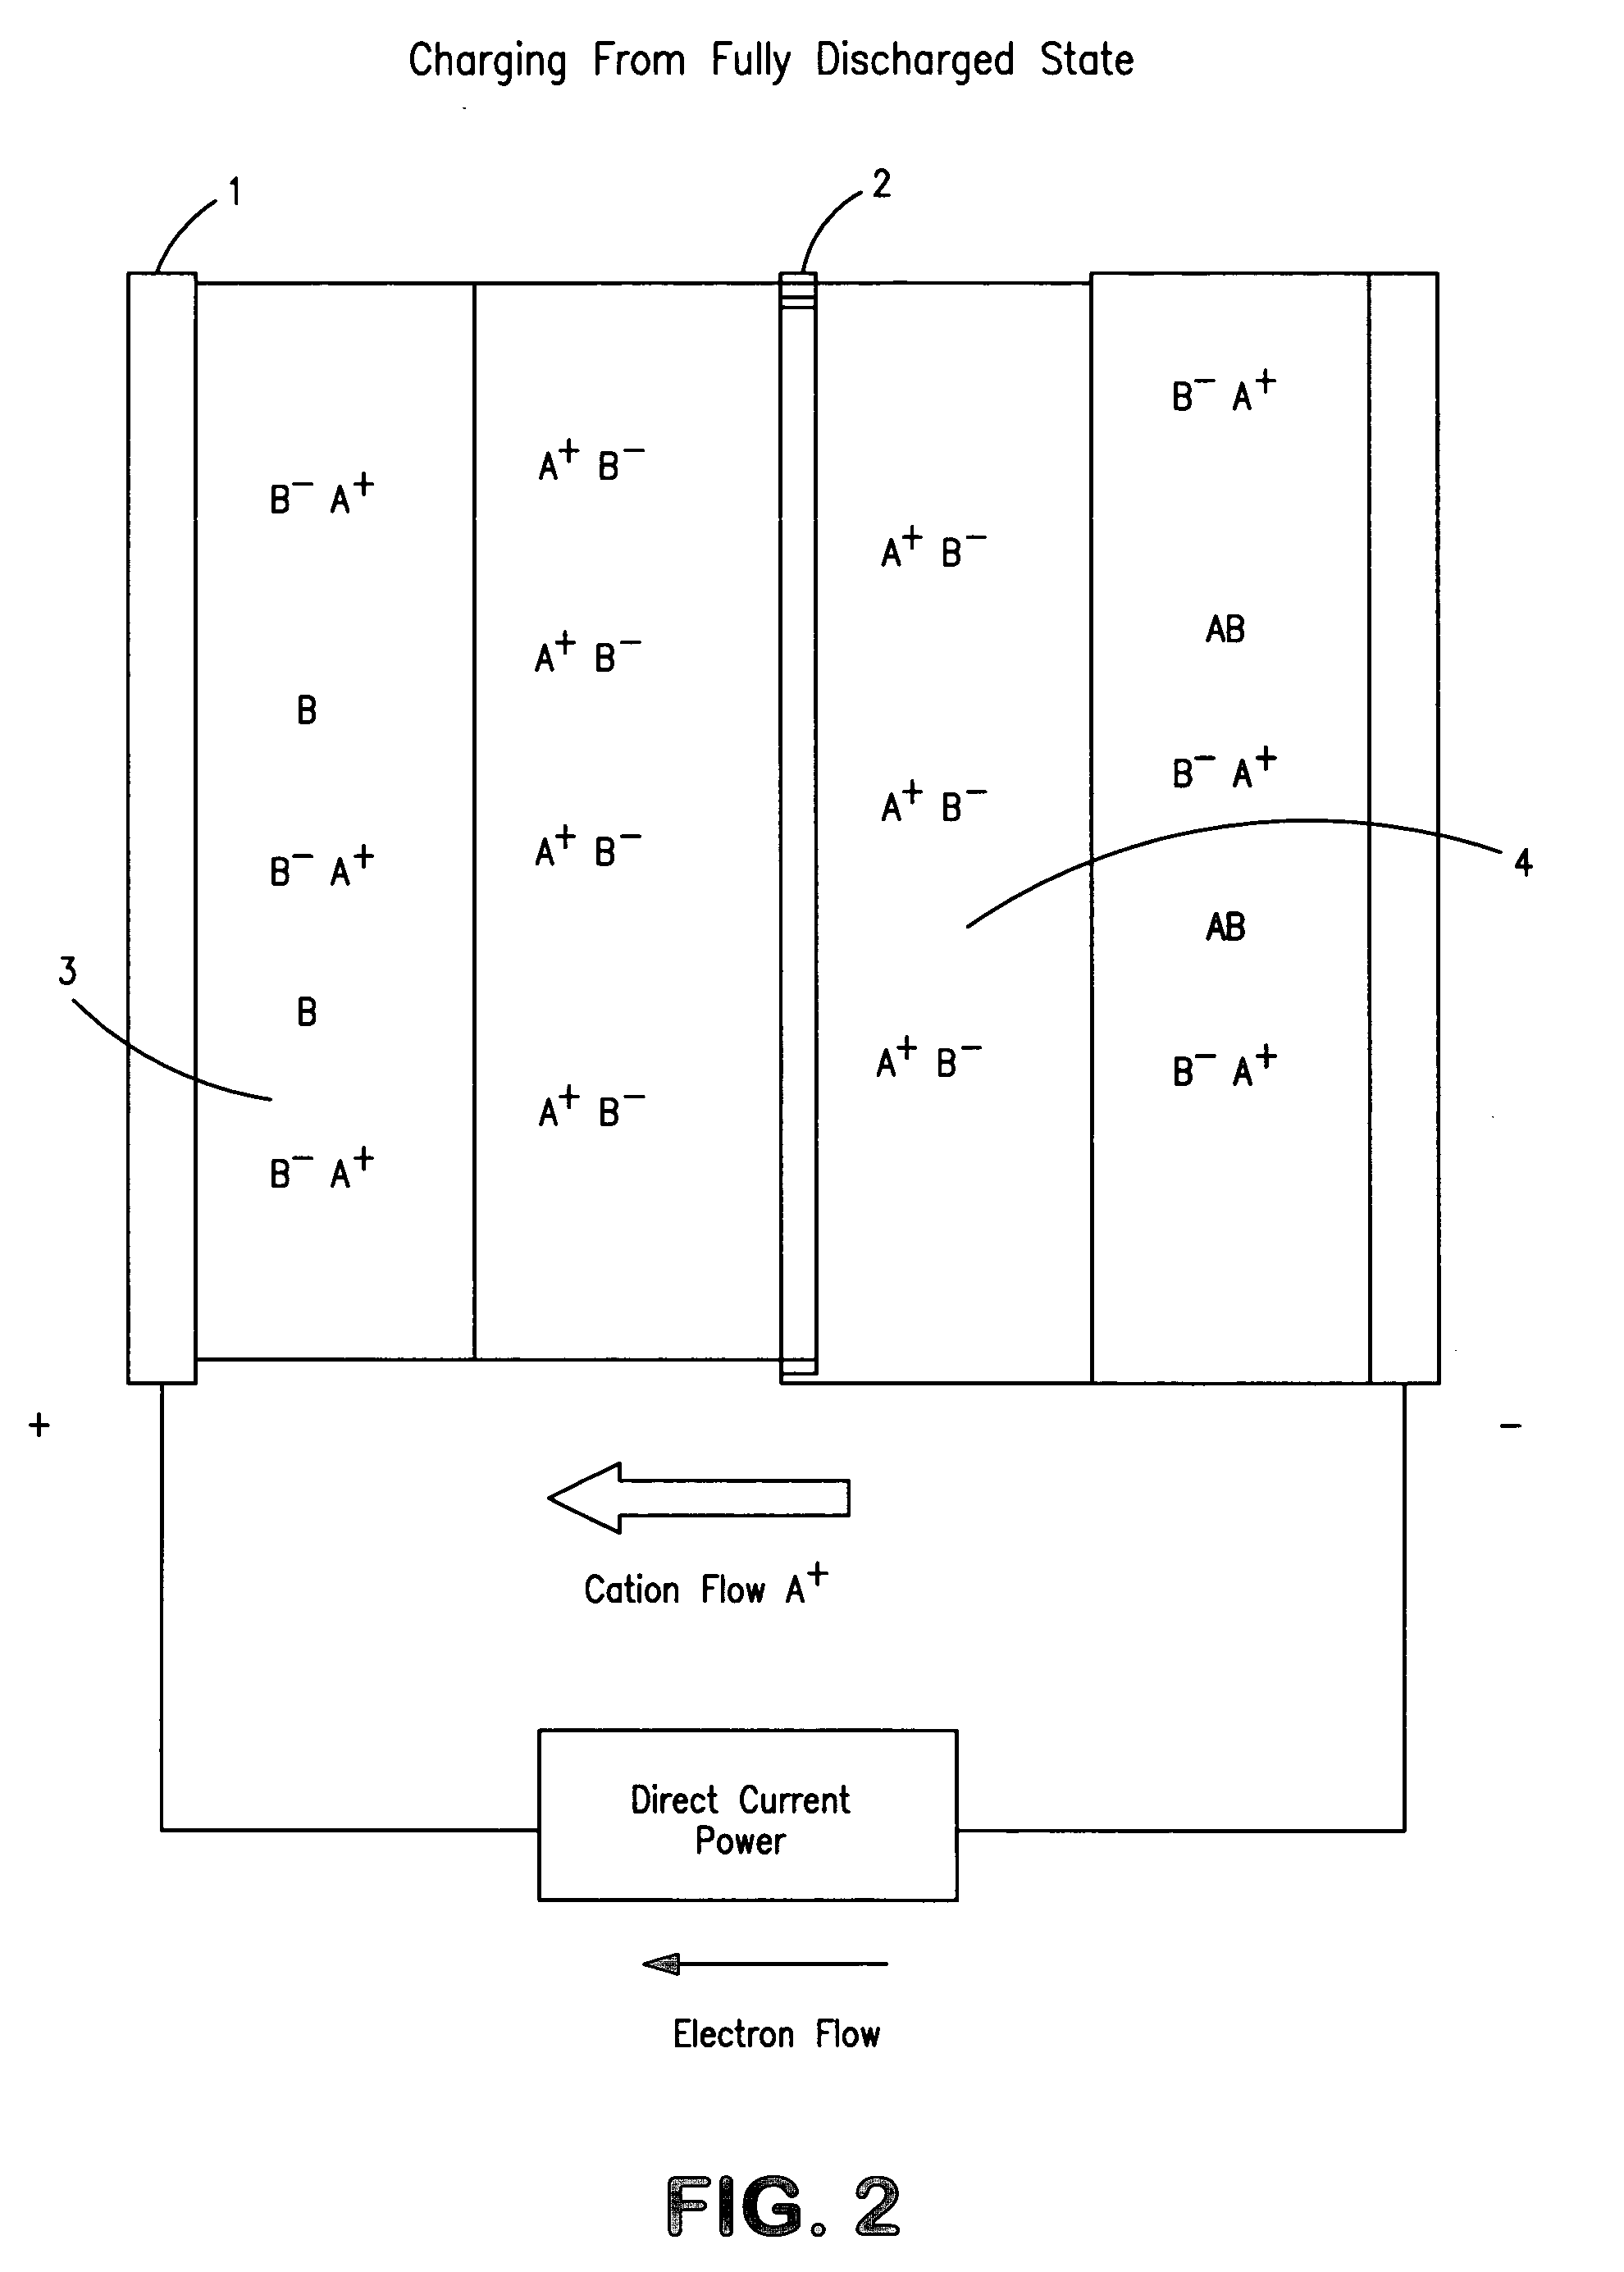 Concentration cell energy storage device